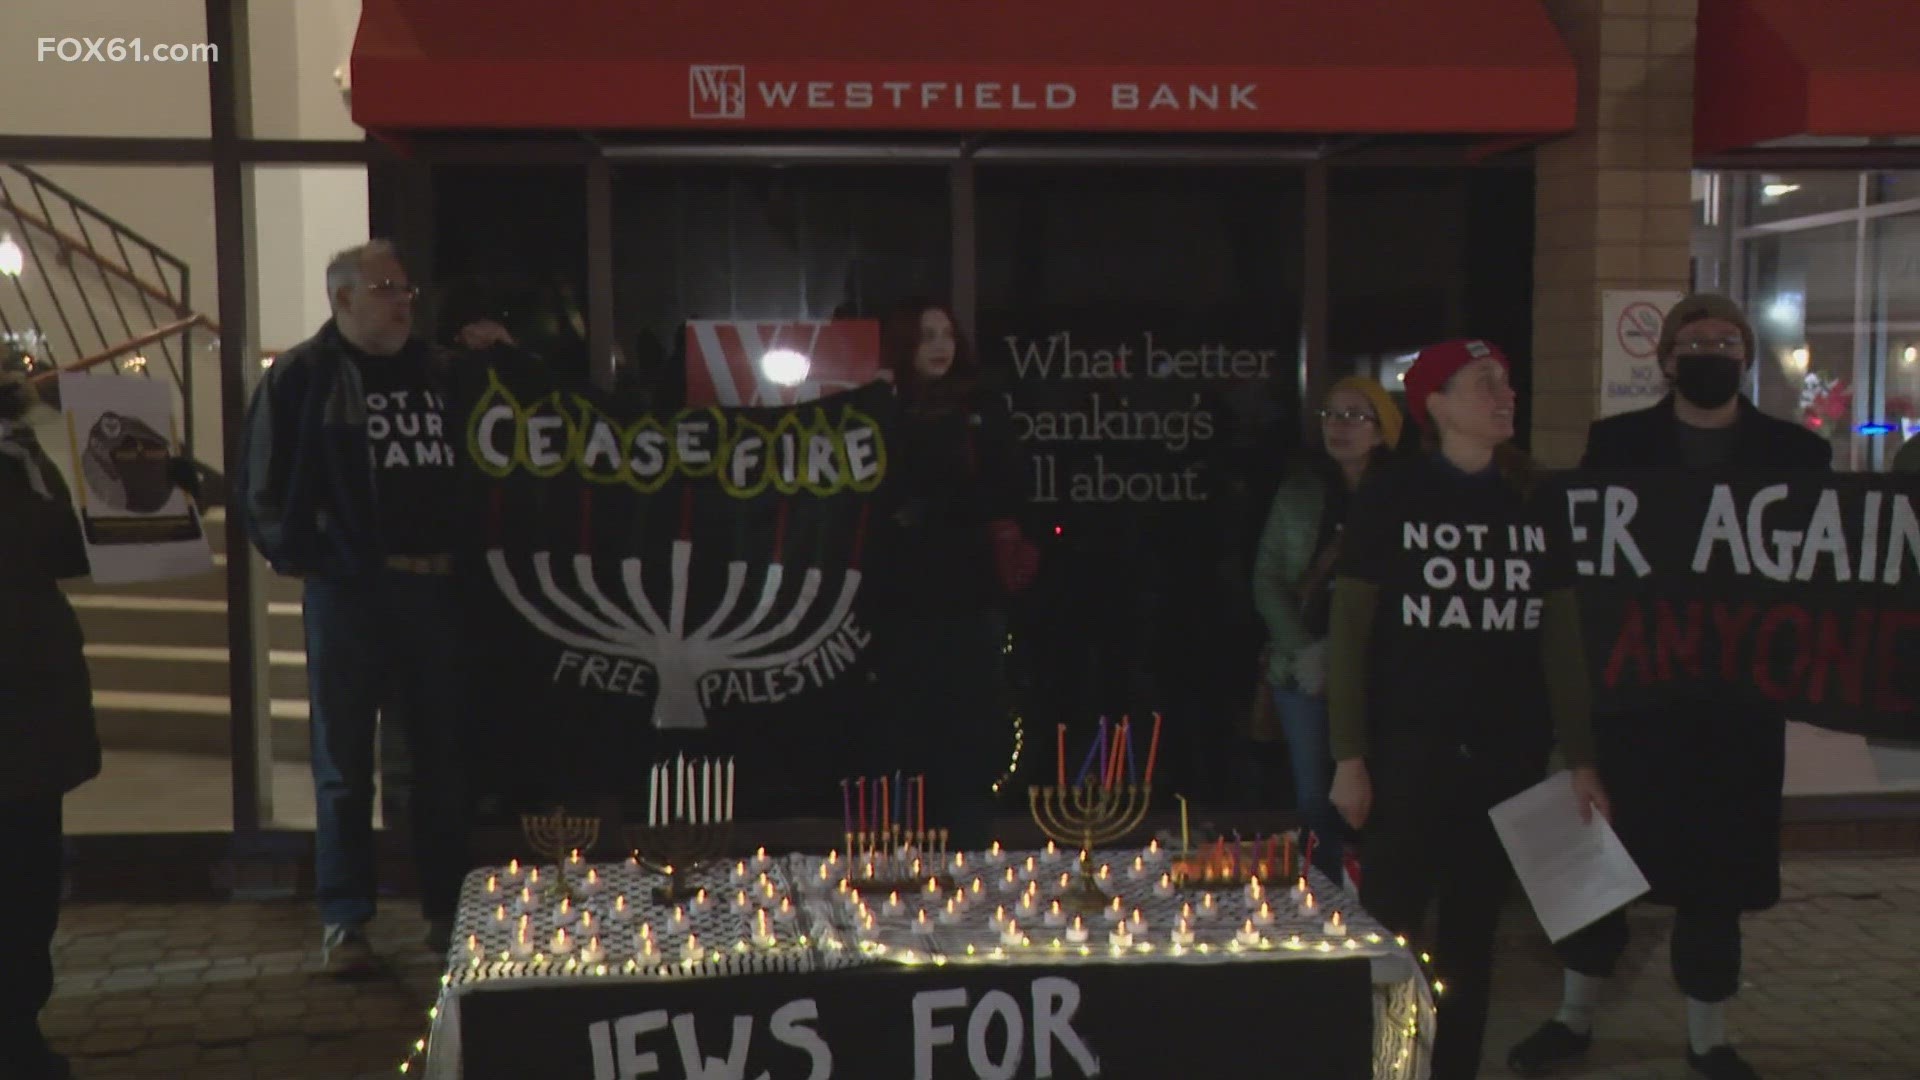 Jewish people in the crowd lit the menorah to celebrate Hannukah and used their faith to stand in solidarity.